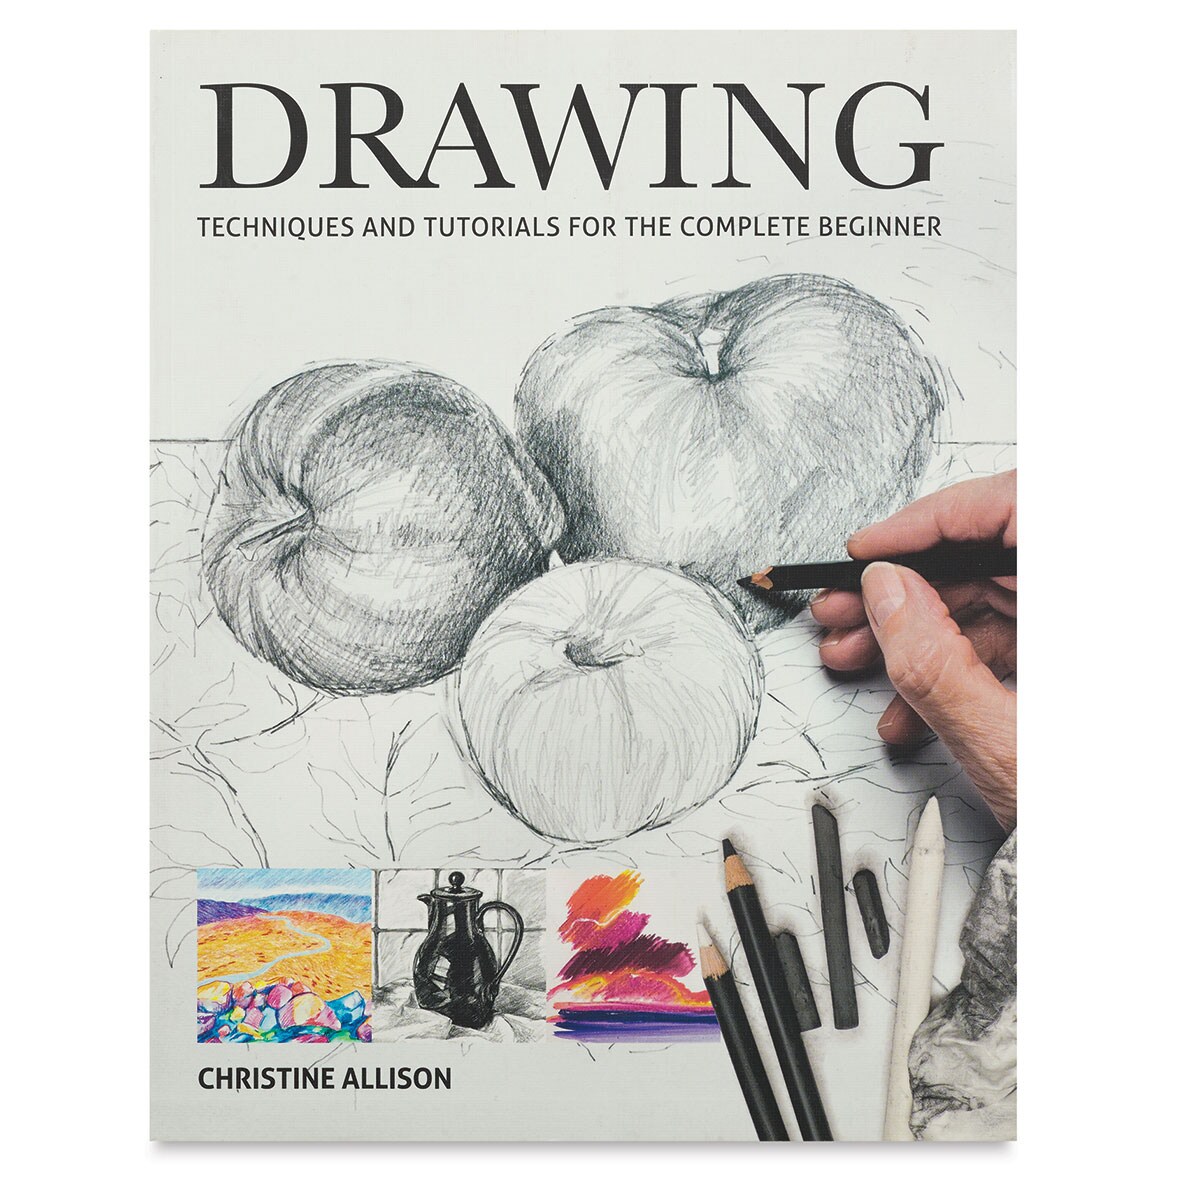 Drawing: Techniques and Tutorials for the Complete Beginner